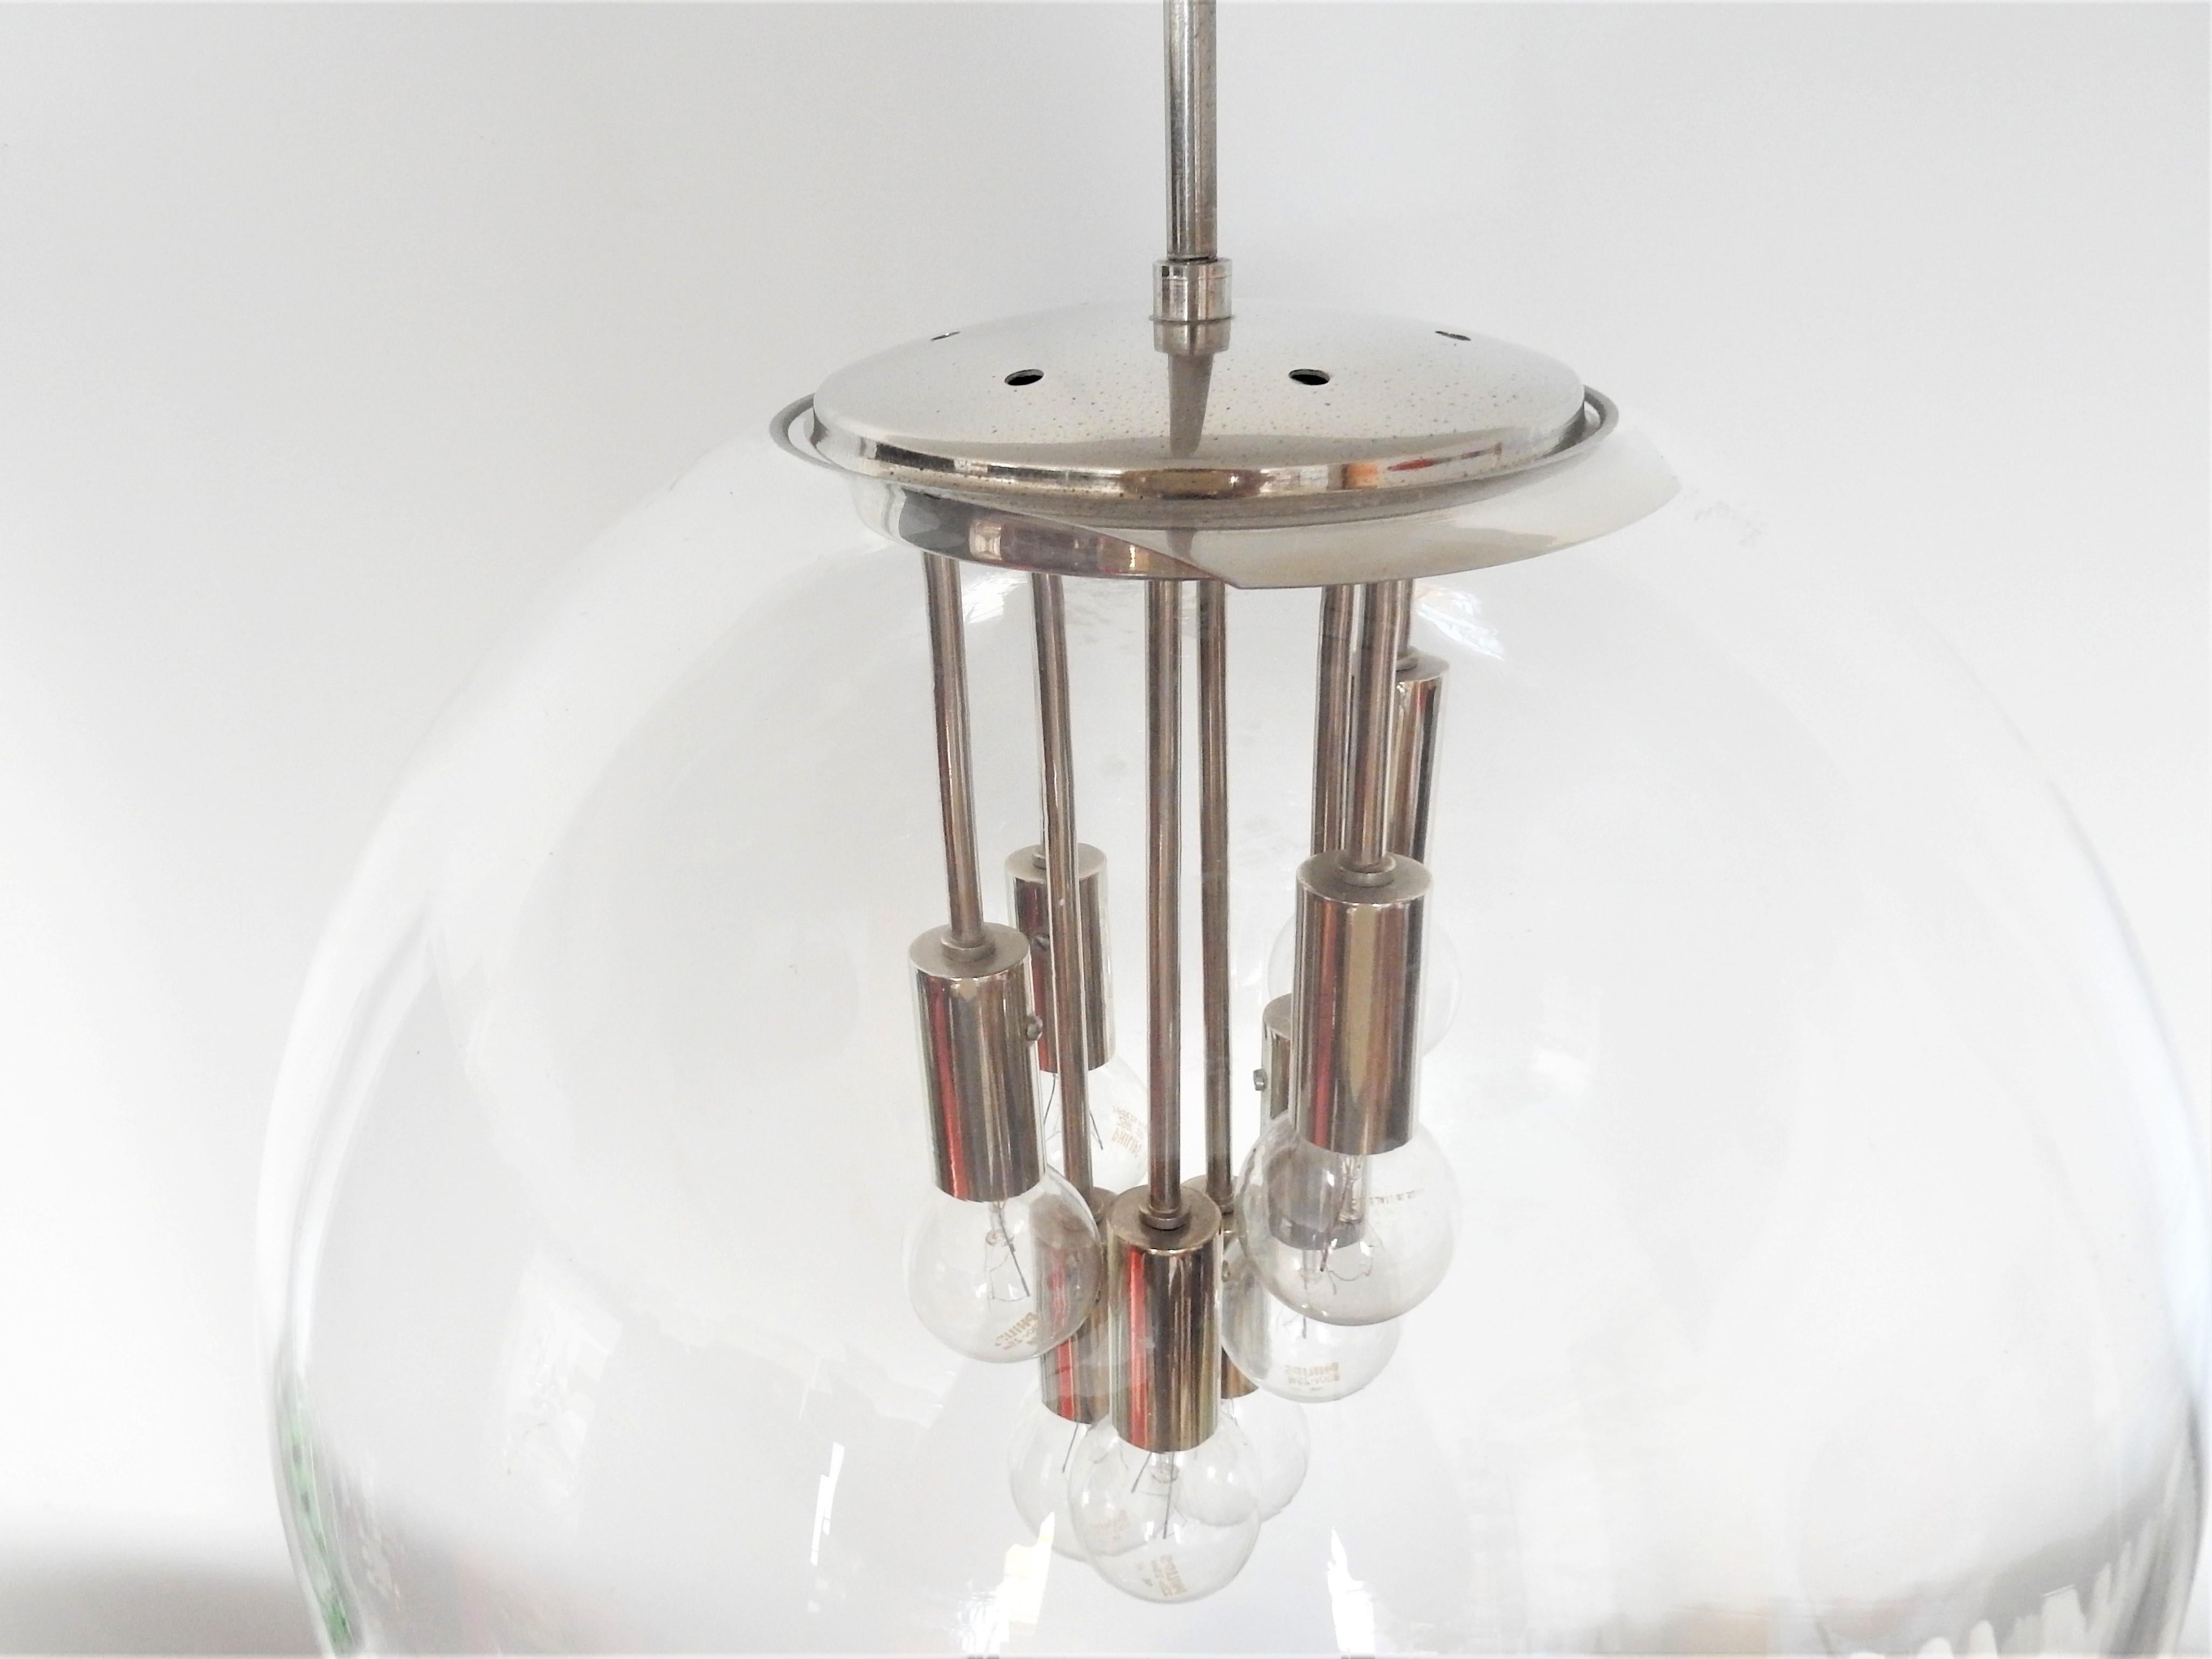 This is an impressive Space Age globe pendant lamp from the 1960s-1970s. The globe is made of a blown glass globe and a chromed metal part with 8 chrome plated E14 fittings on the inside, in a playful setting. This lamp looks very much like the